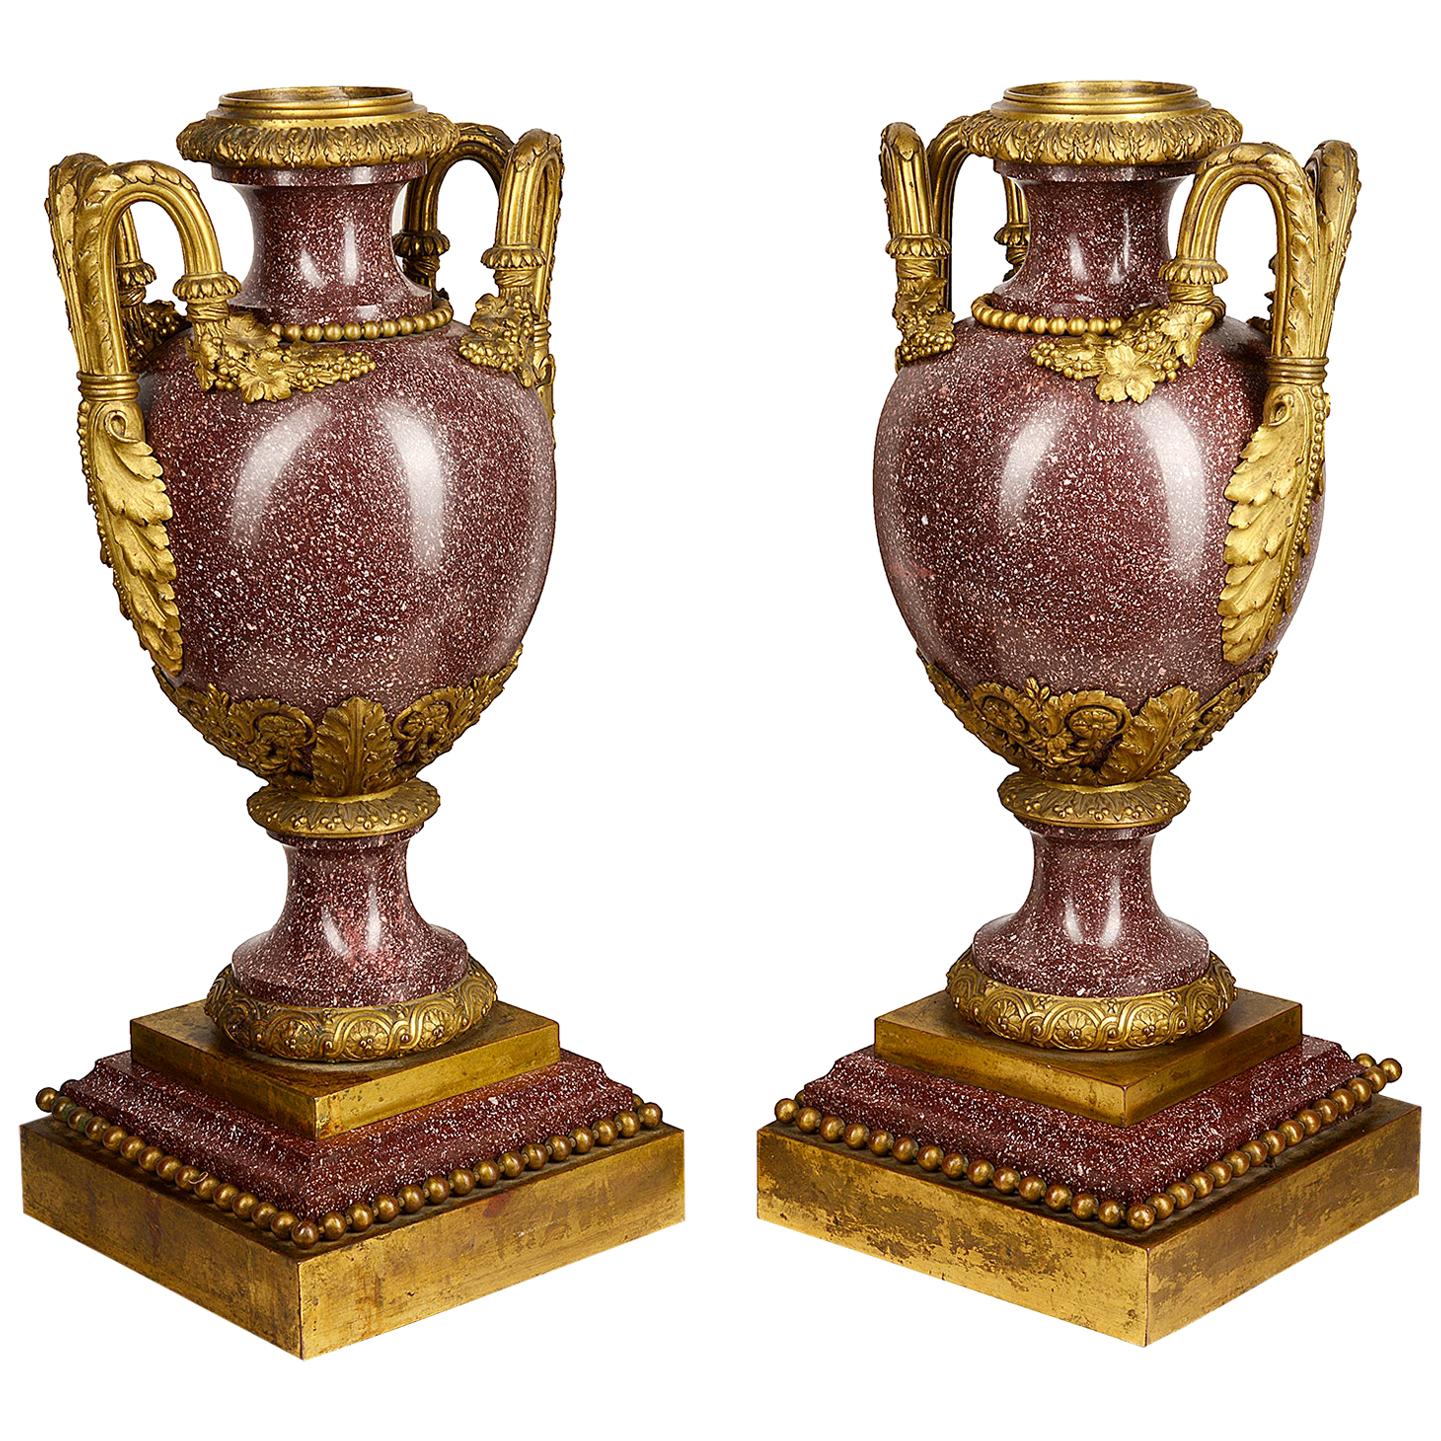 Fine Quality Pair of 19th Century French Porphery Urns